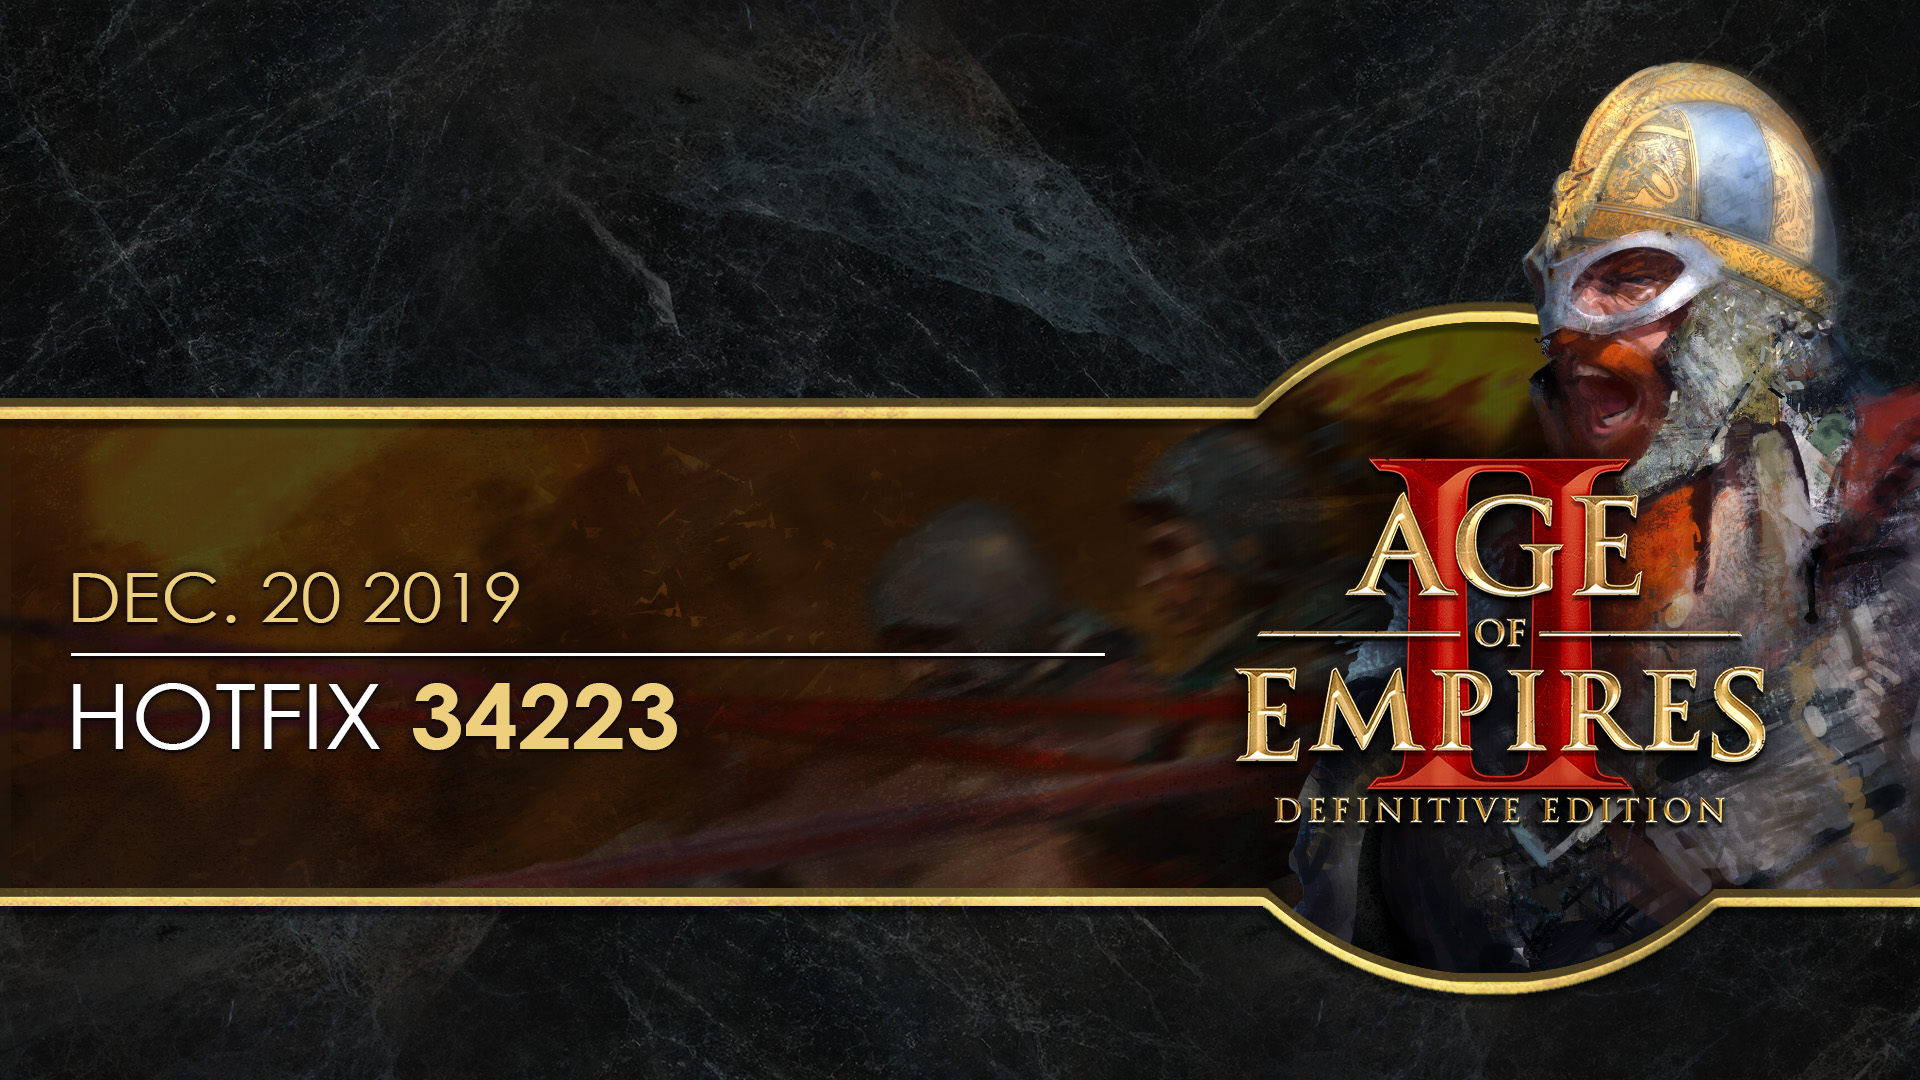 Age Of Empires Ii Definitive Edition Hotfix 34223 Age Of Empires